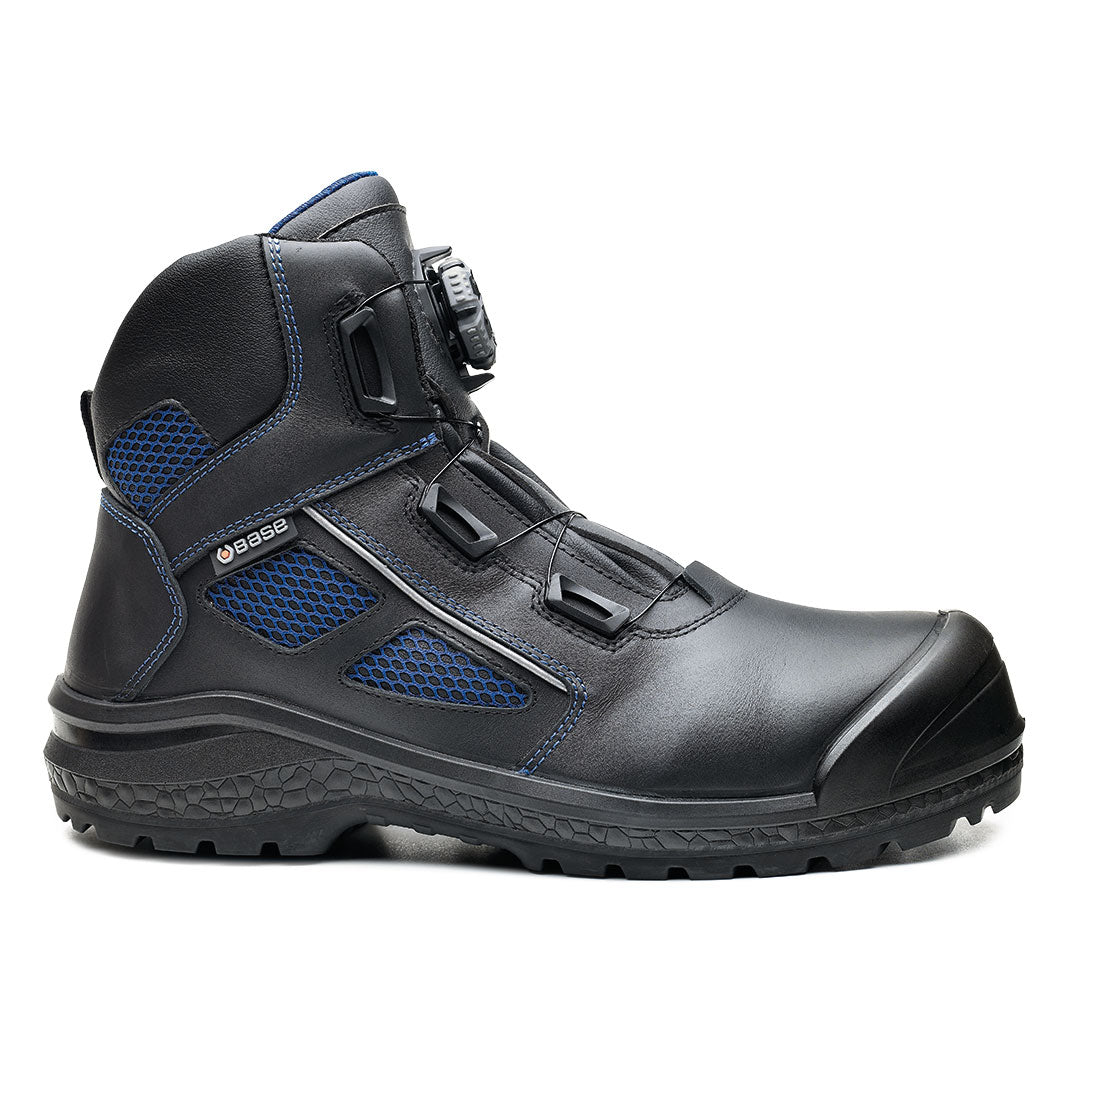 Base Be-Fast Top Safety Boots S3 HRO CI HI SRC